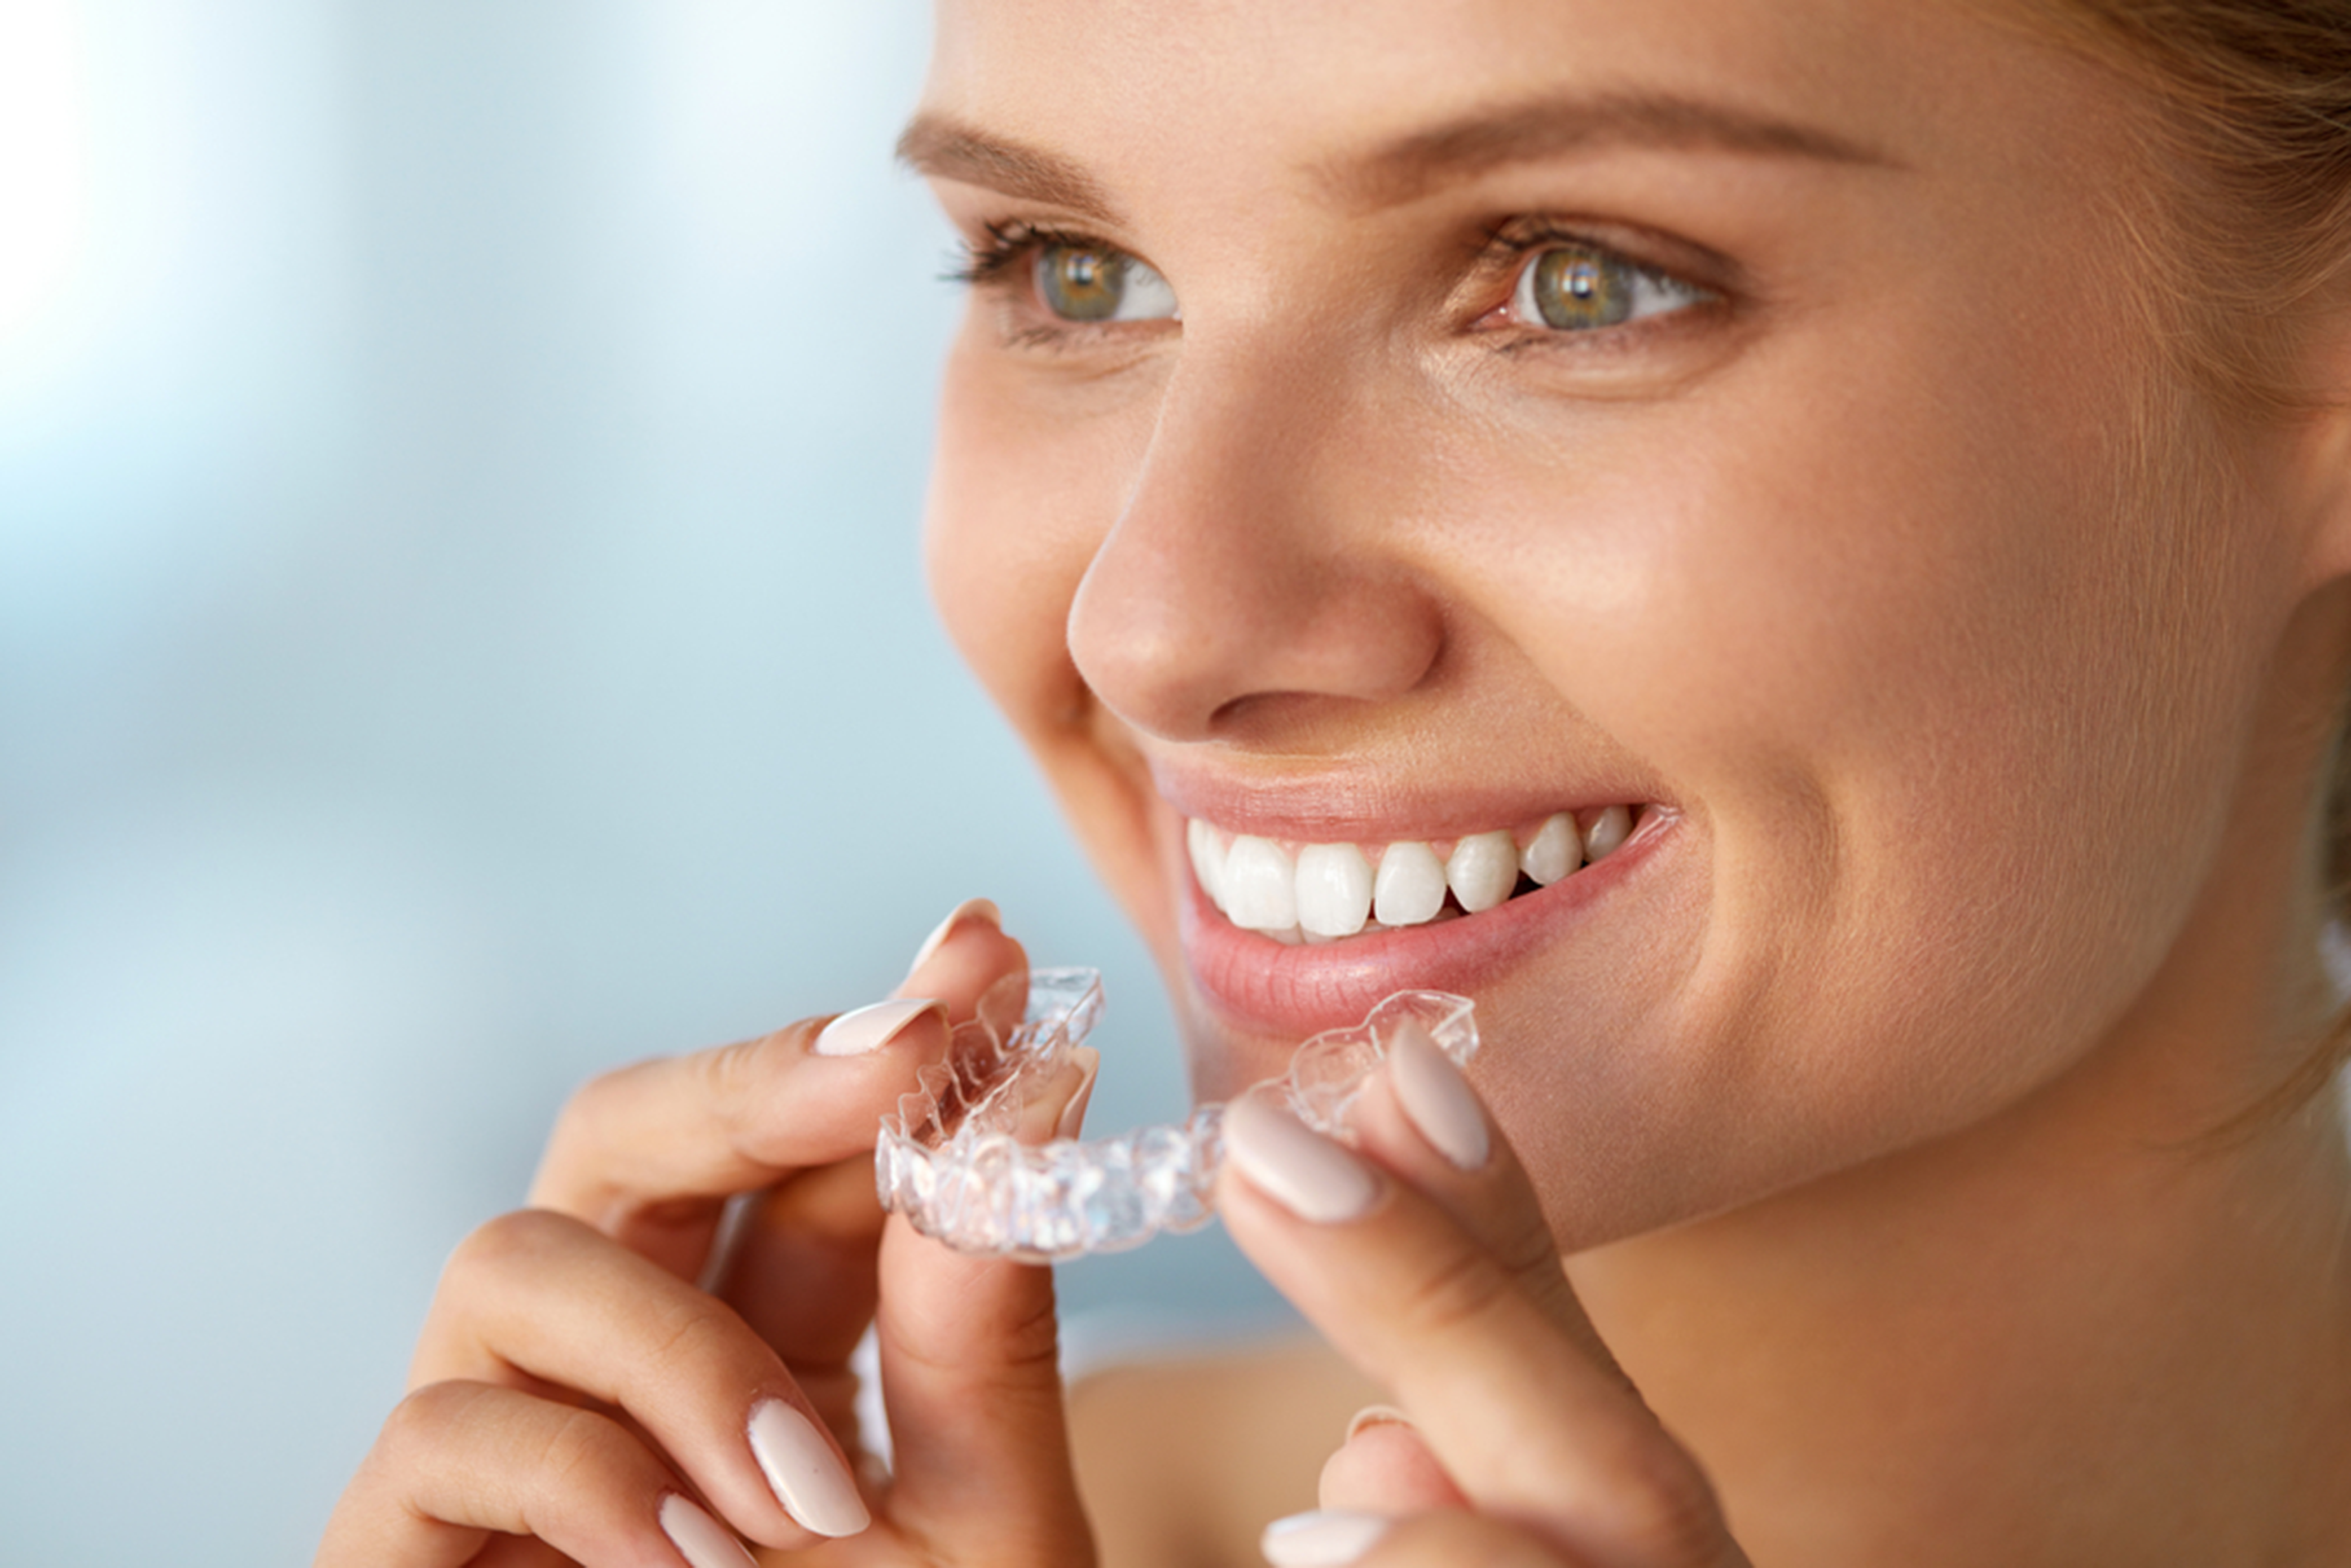 How to Get the Most Out of Your Invisalign